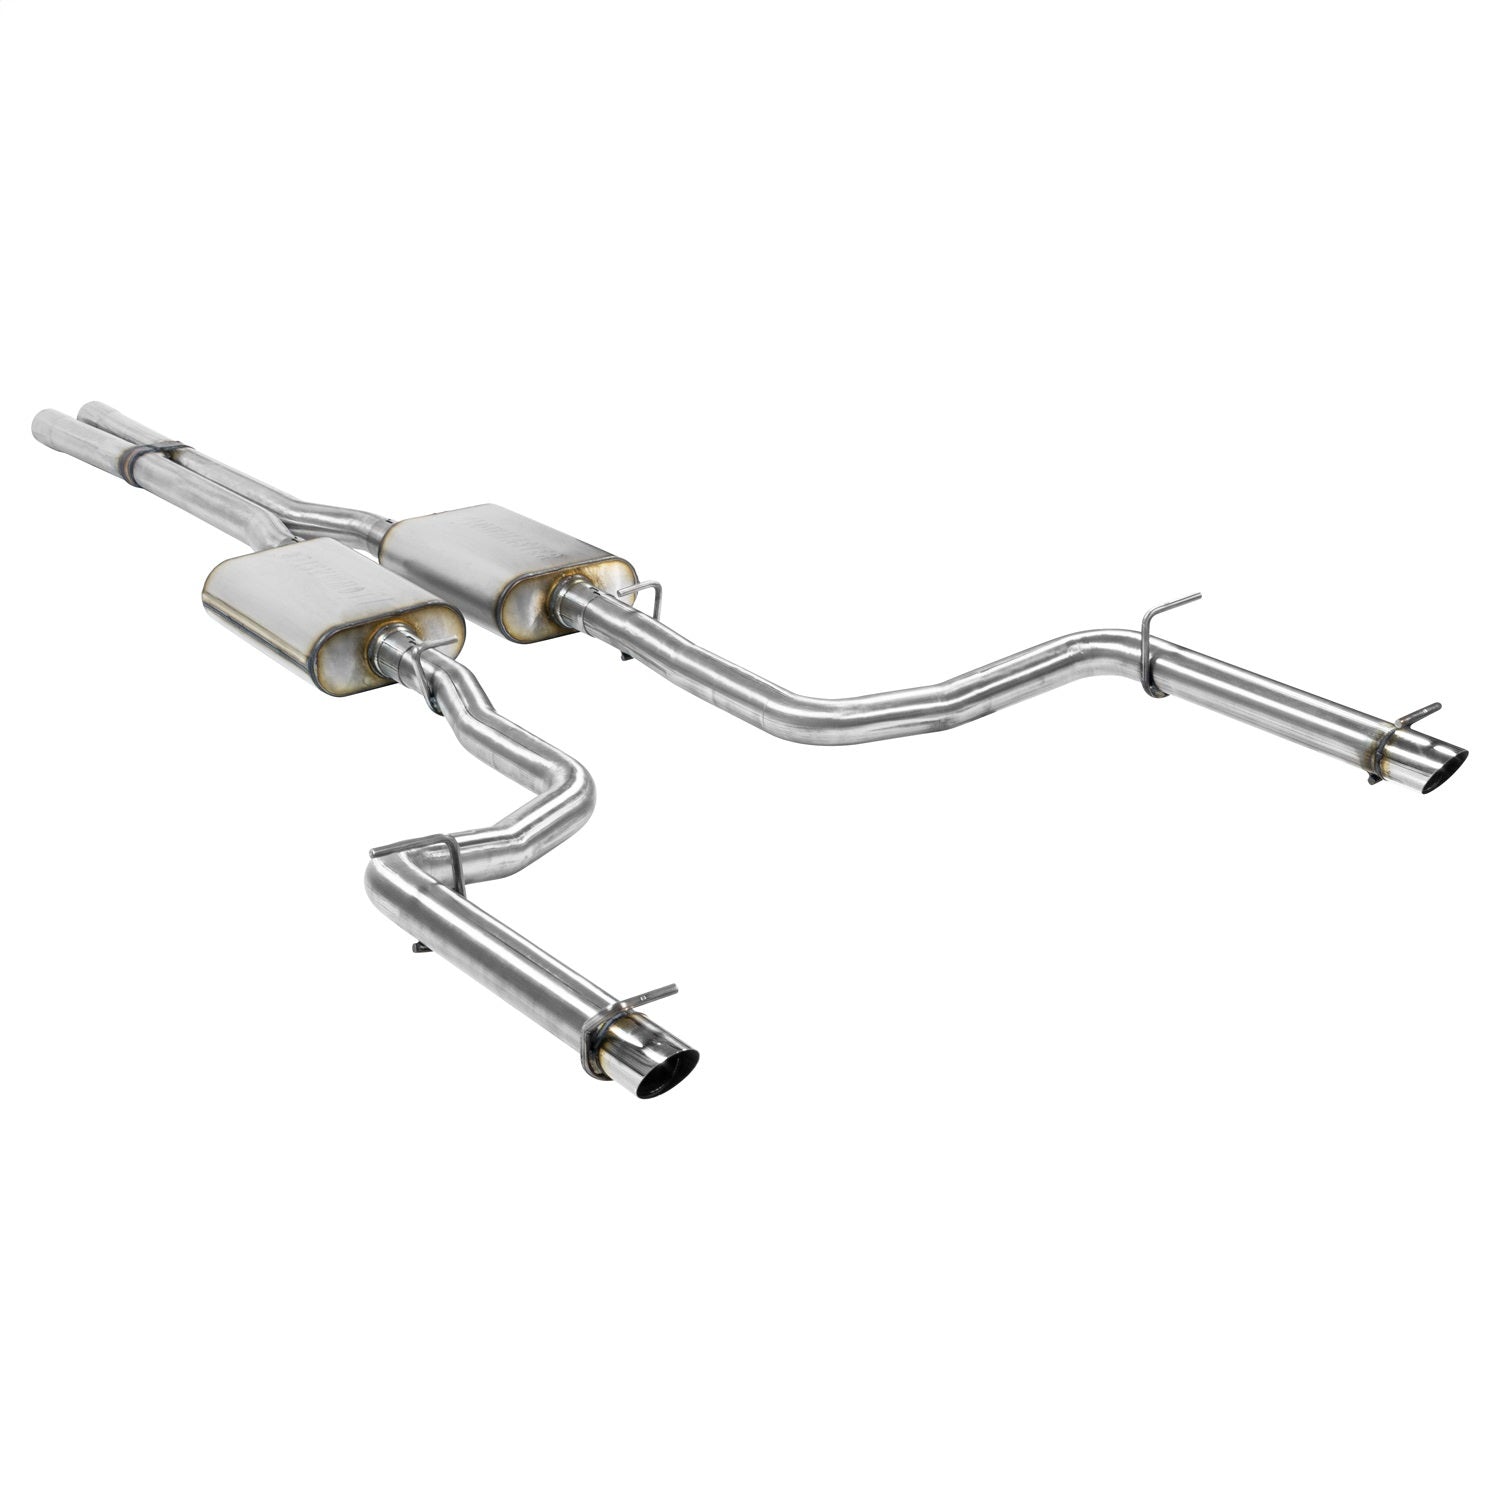 Flowmaster 717831 FlowFX Cat-Back Exhaust System Fits 11-14 300 Charger